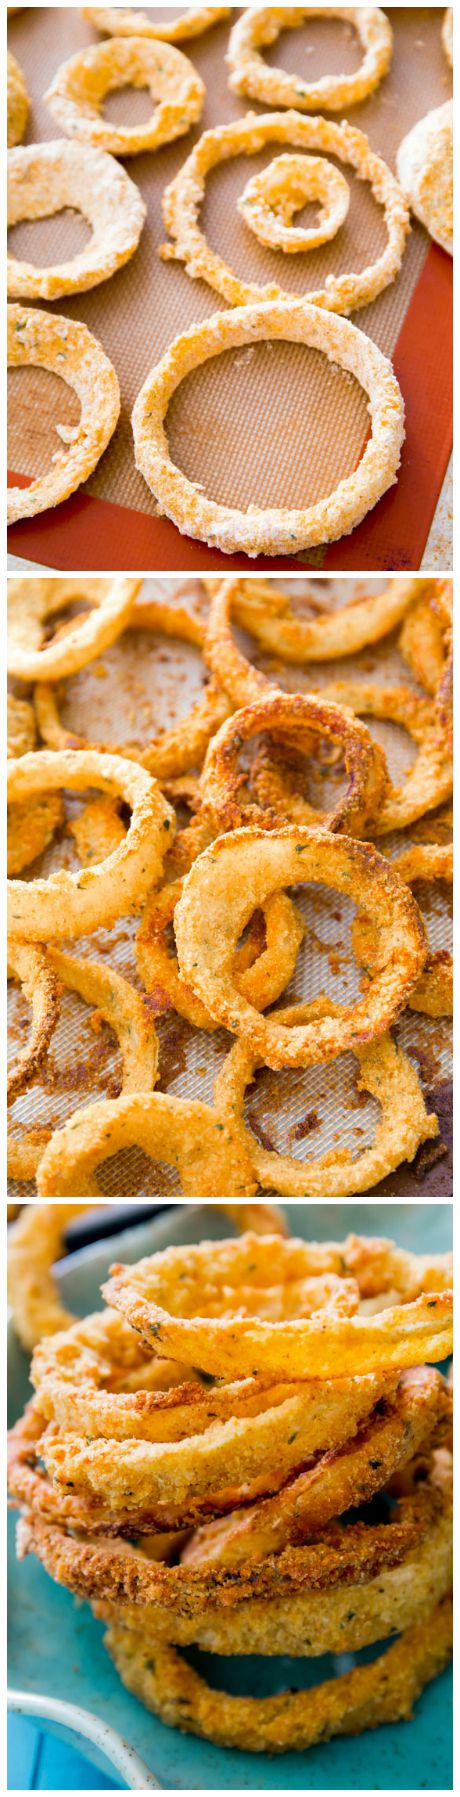 3 images of baked onion rings